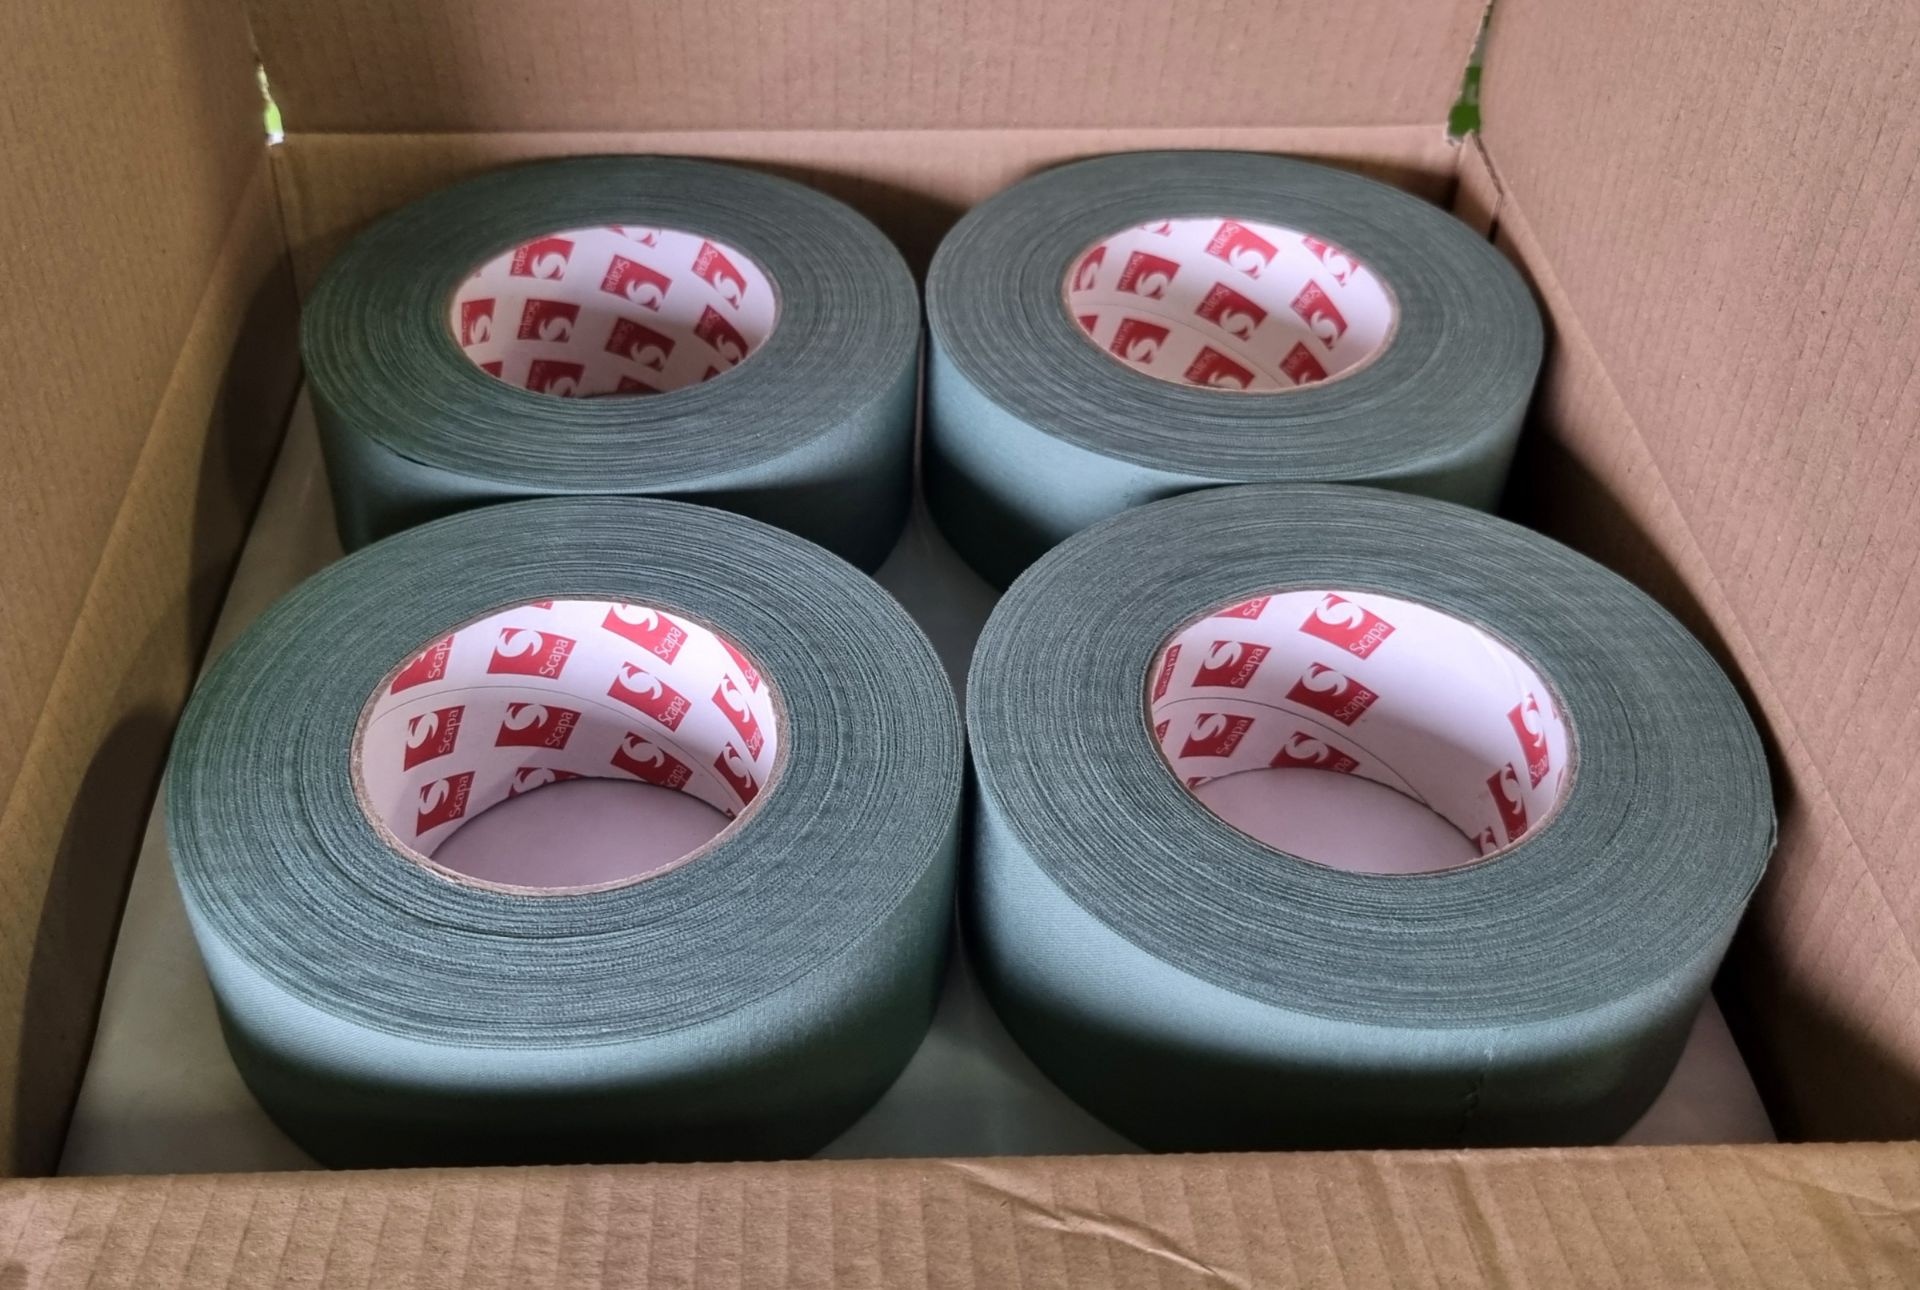 6x boxes of Scapa 3302 uncoated cotton cloth adhesive tape - olive green - 50mm x 50m - Image 4 of 4